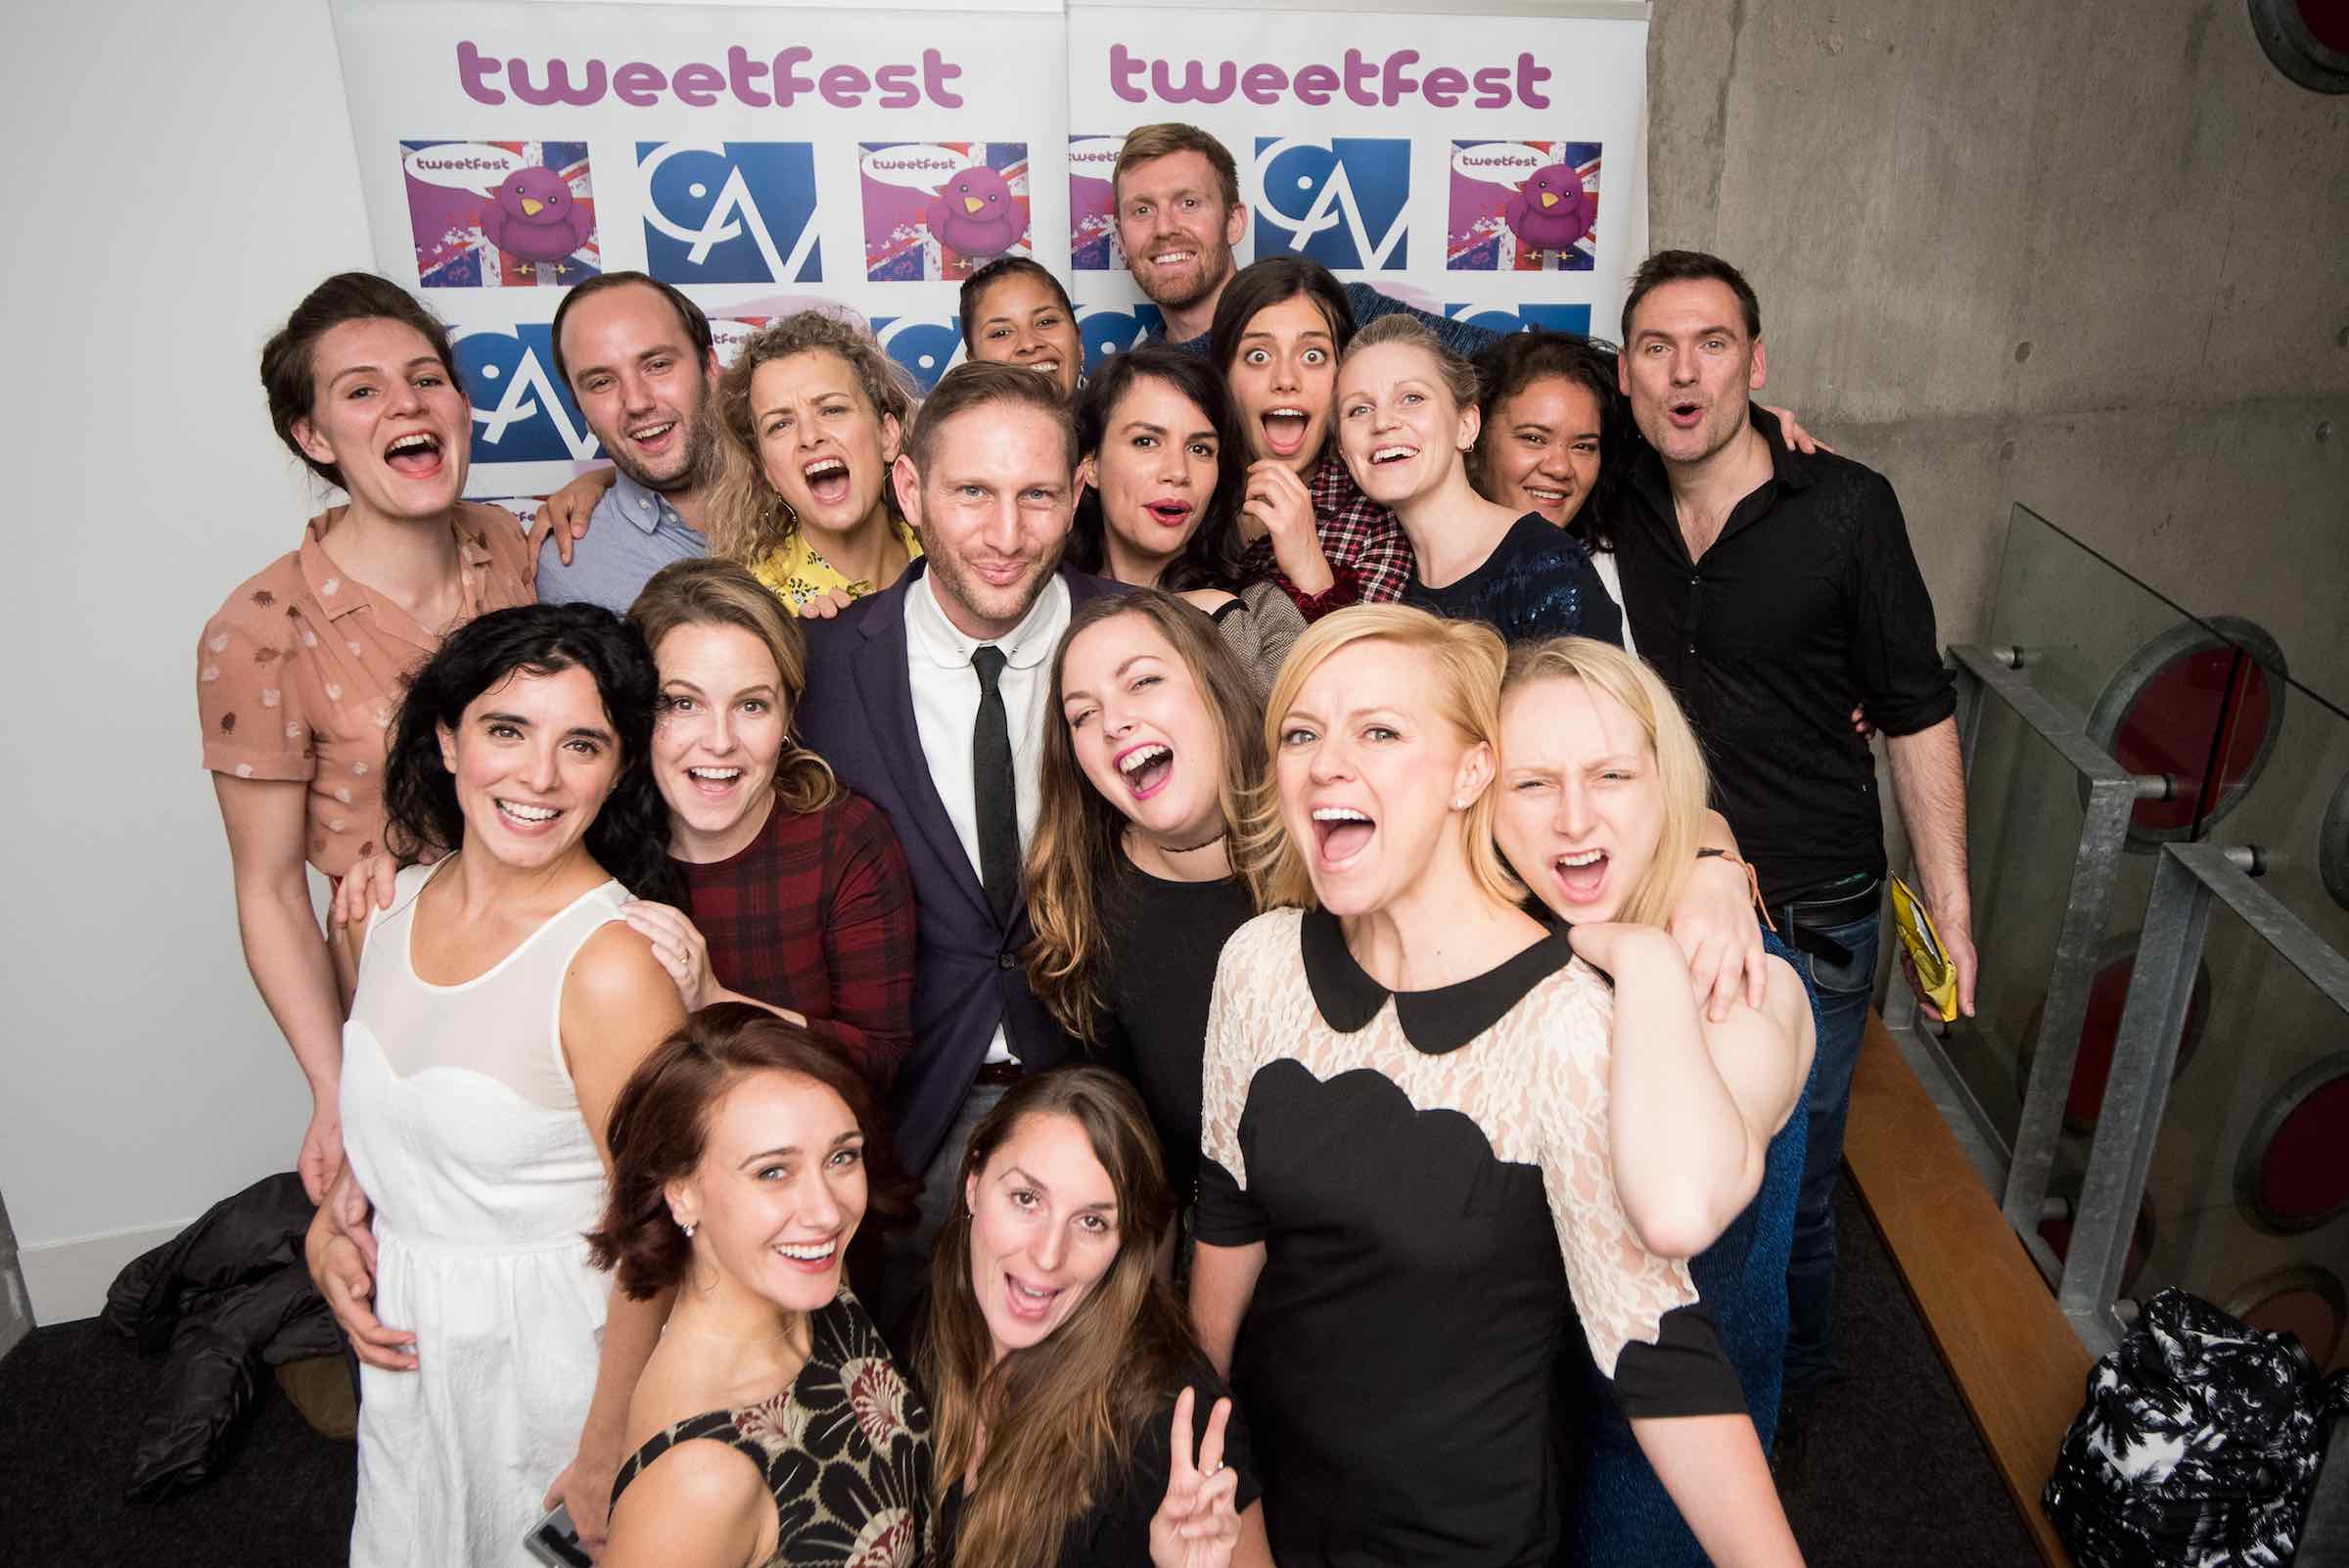 The goal of London's TweetFest Film Festival is to help filmmakers create long futures in the industry and champion women in film.